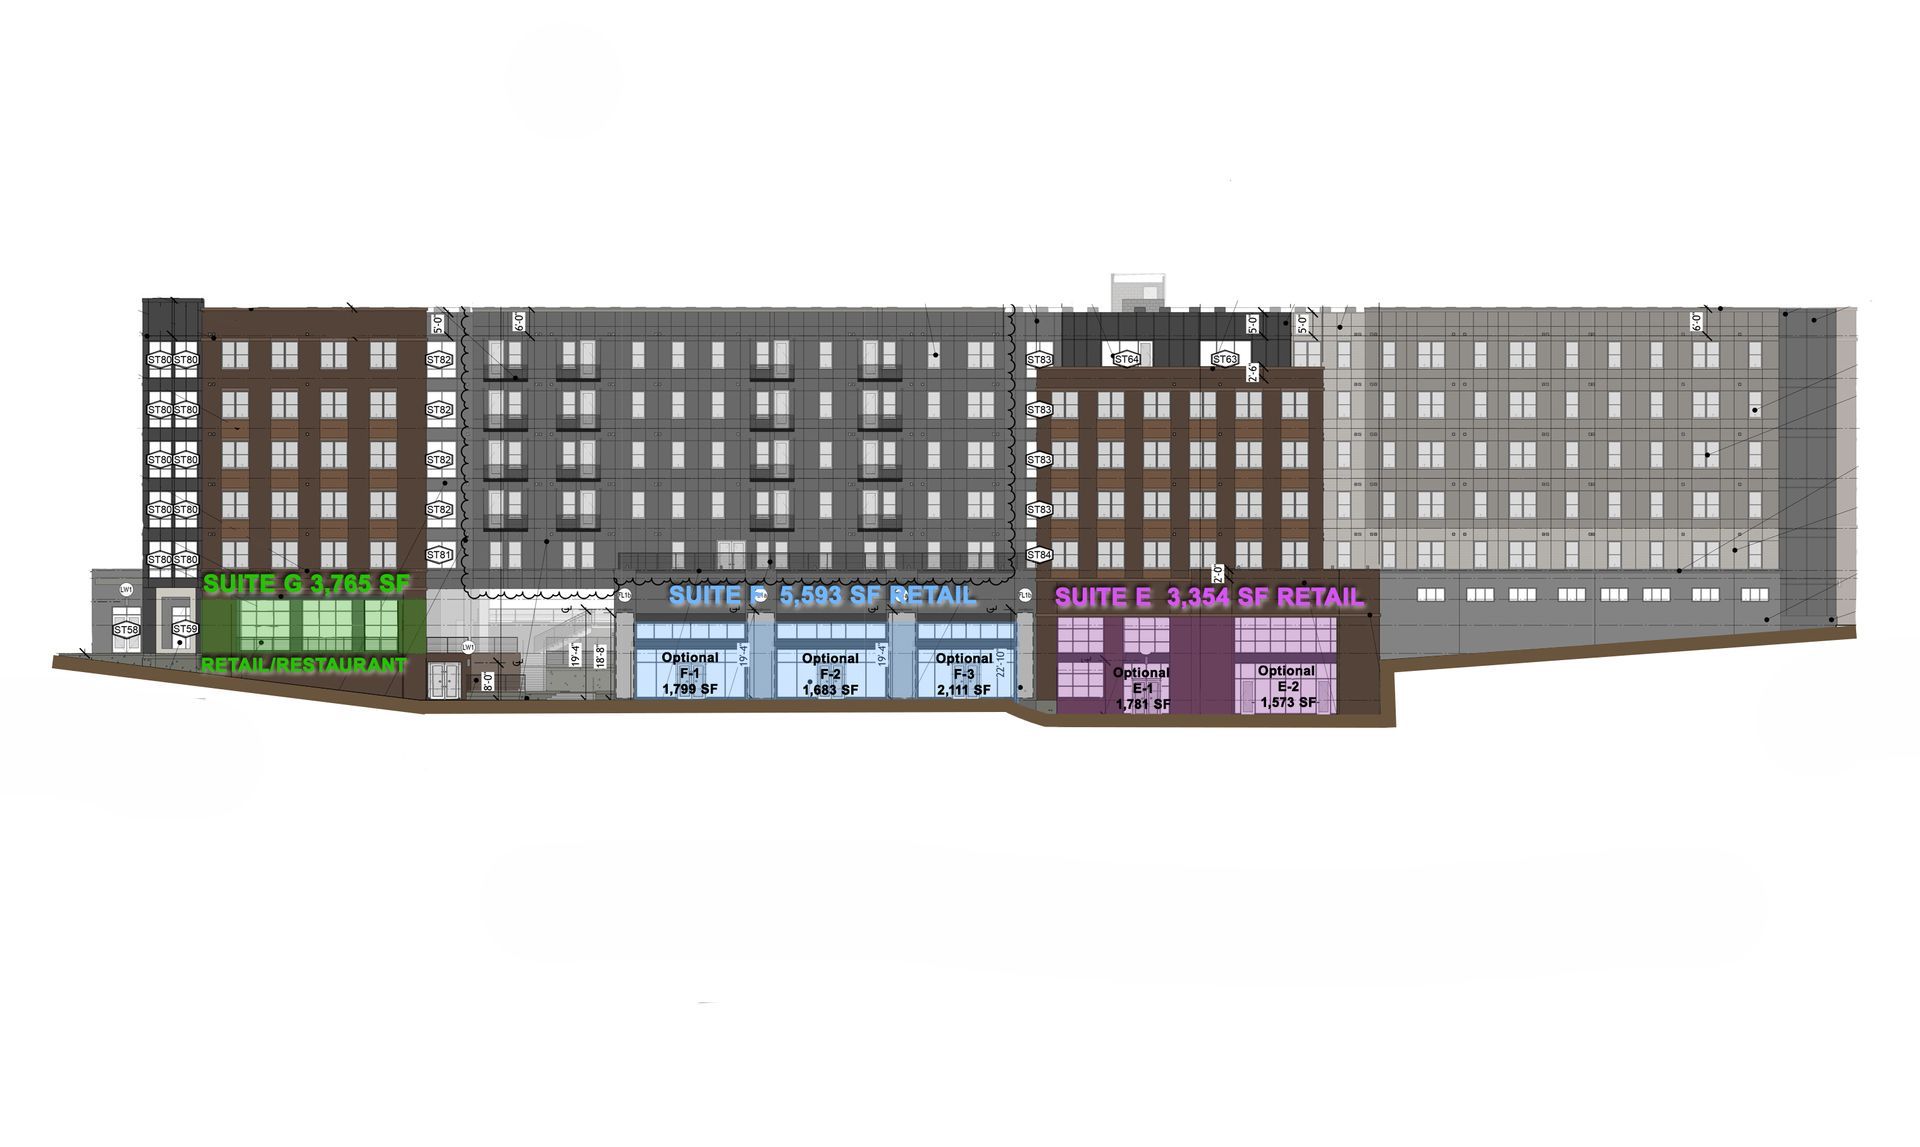 Elevations of Rambler Athens with Retail Suites highlighted.